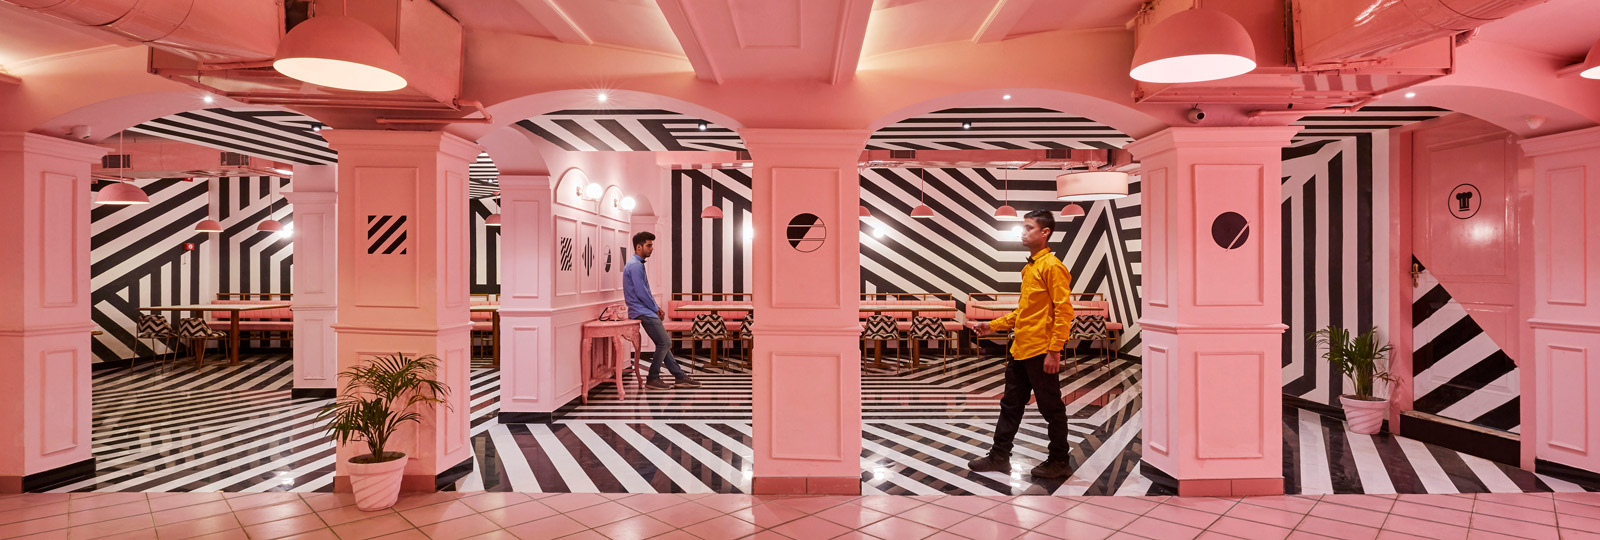 Feast India Company: A throng of pink zebras